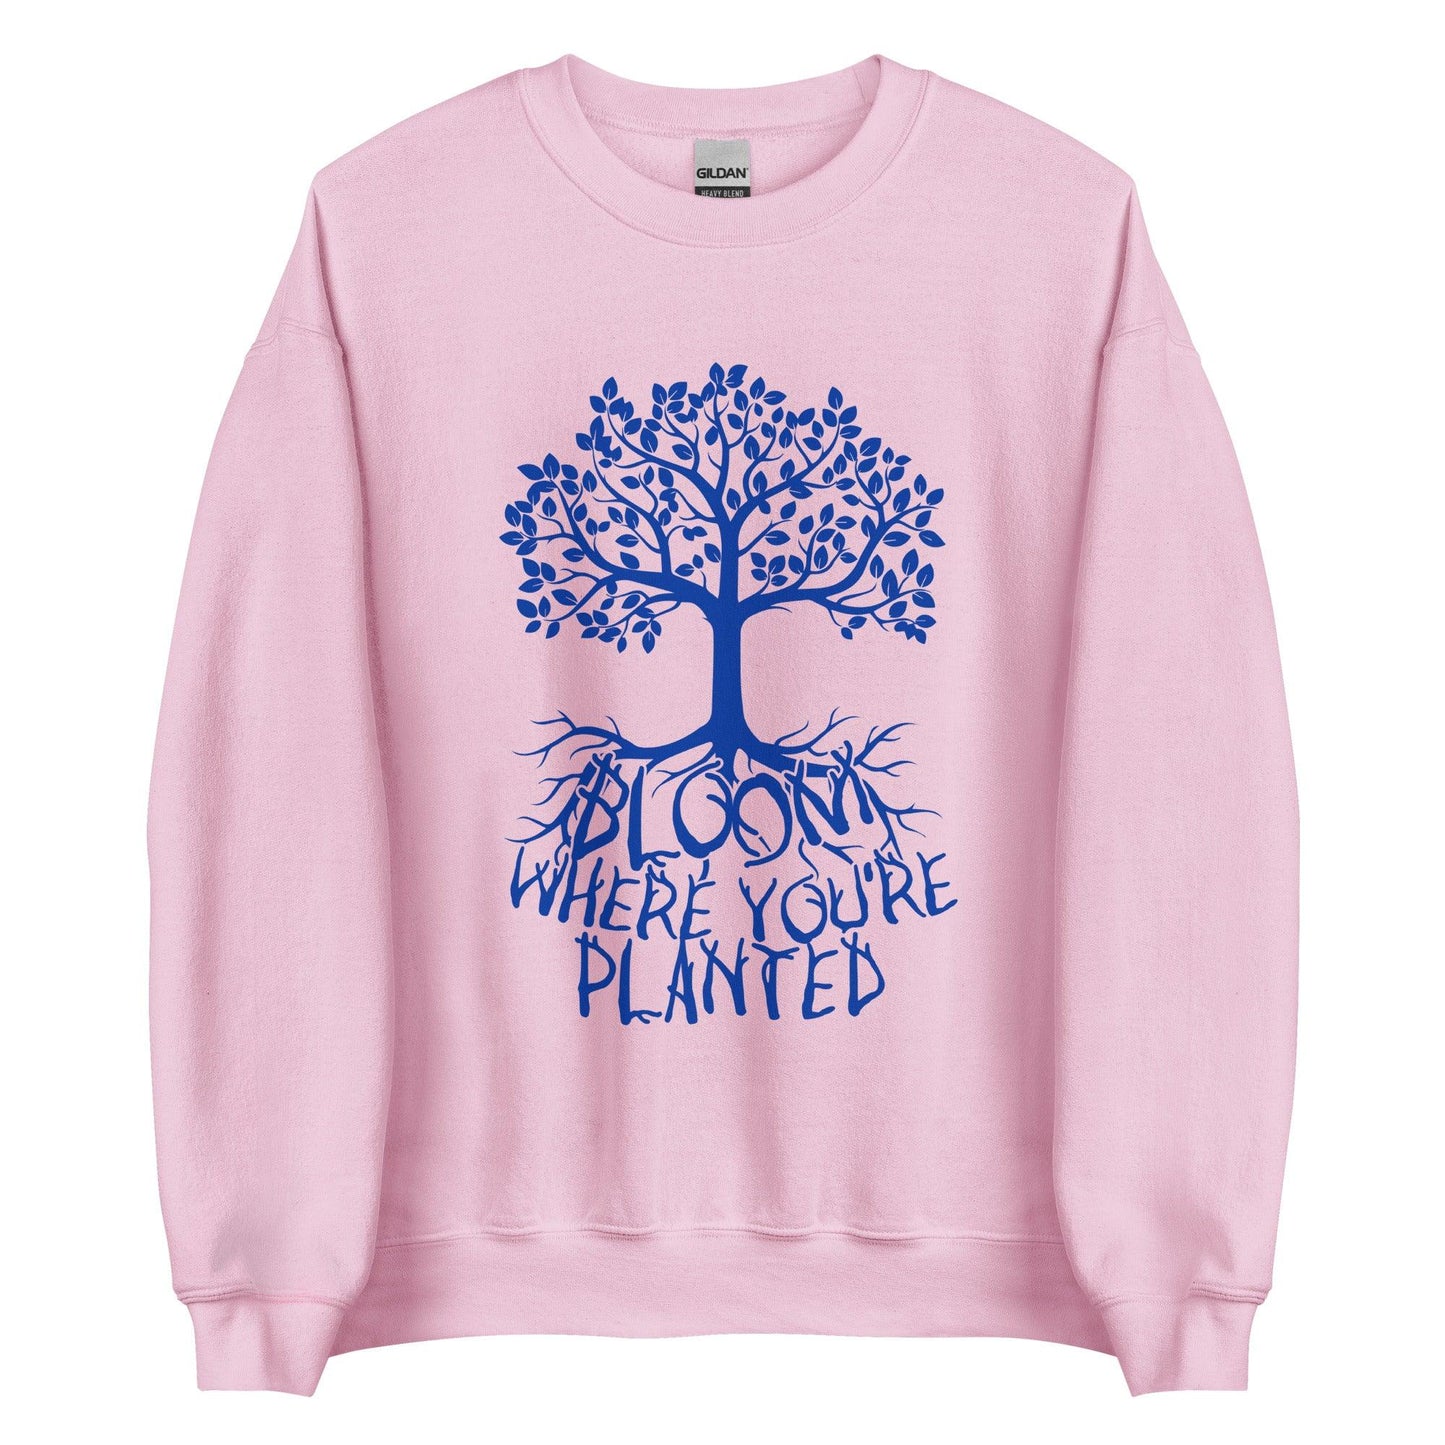 Nate Sestina "Where You're Planted" Sweatshirt - Fan Arch